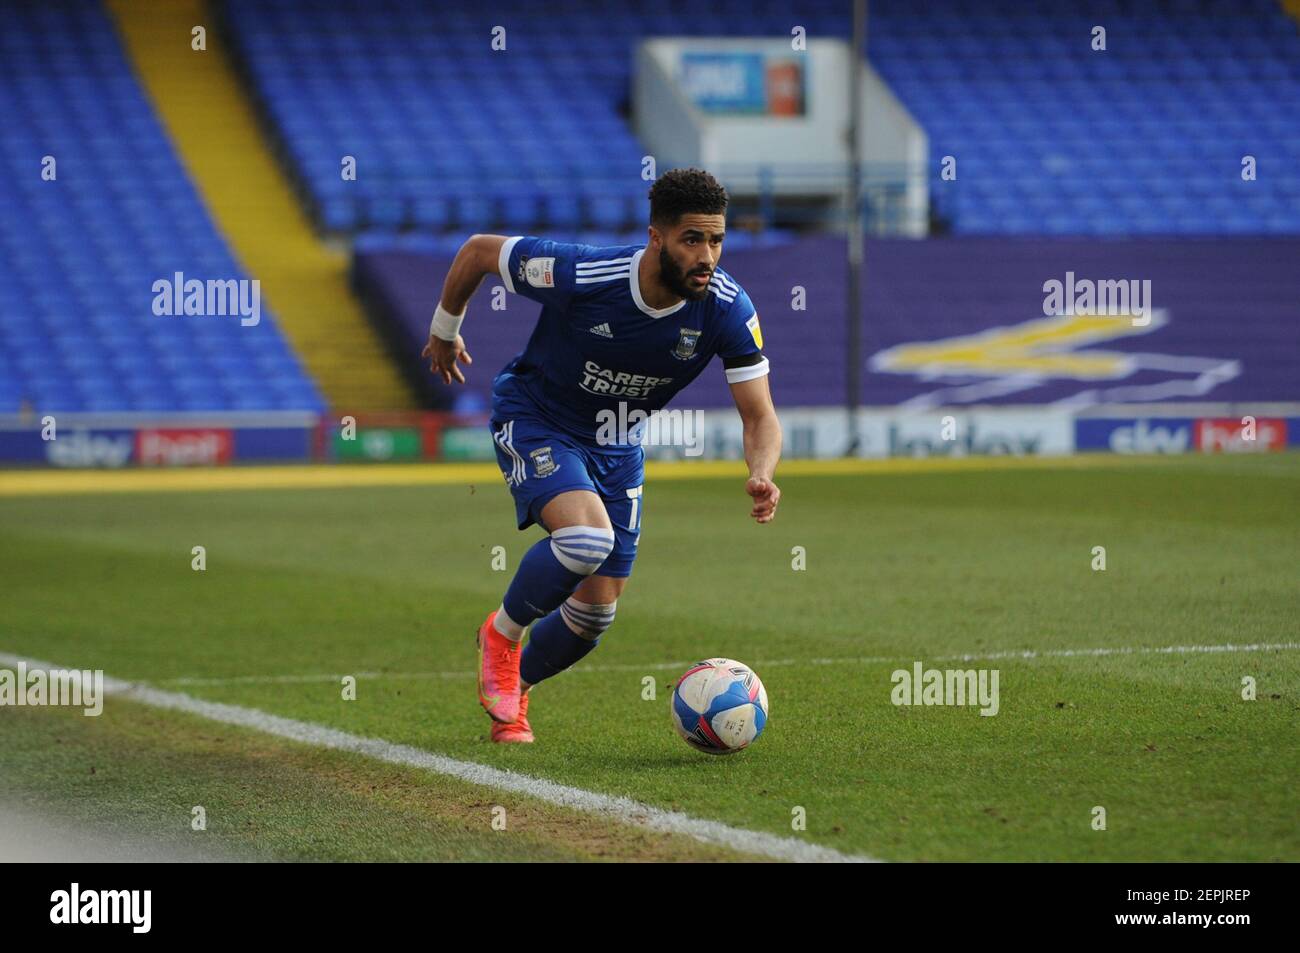 Ipswich, UK. 27th February 2021Ipswichs Keanan Bennetts during the Sky Bet League 1 match between Ipswich Town and Doncaster Rovers at Portman Road, Ipswich on Saturday 27th February 2021. (Credit: Ben Pooley | MI News) Credit: MI News & Sport /Alamy Live News Stock Photo